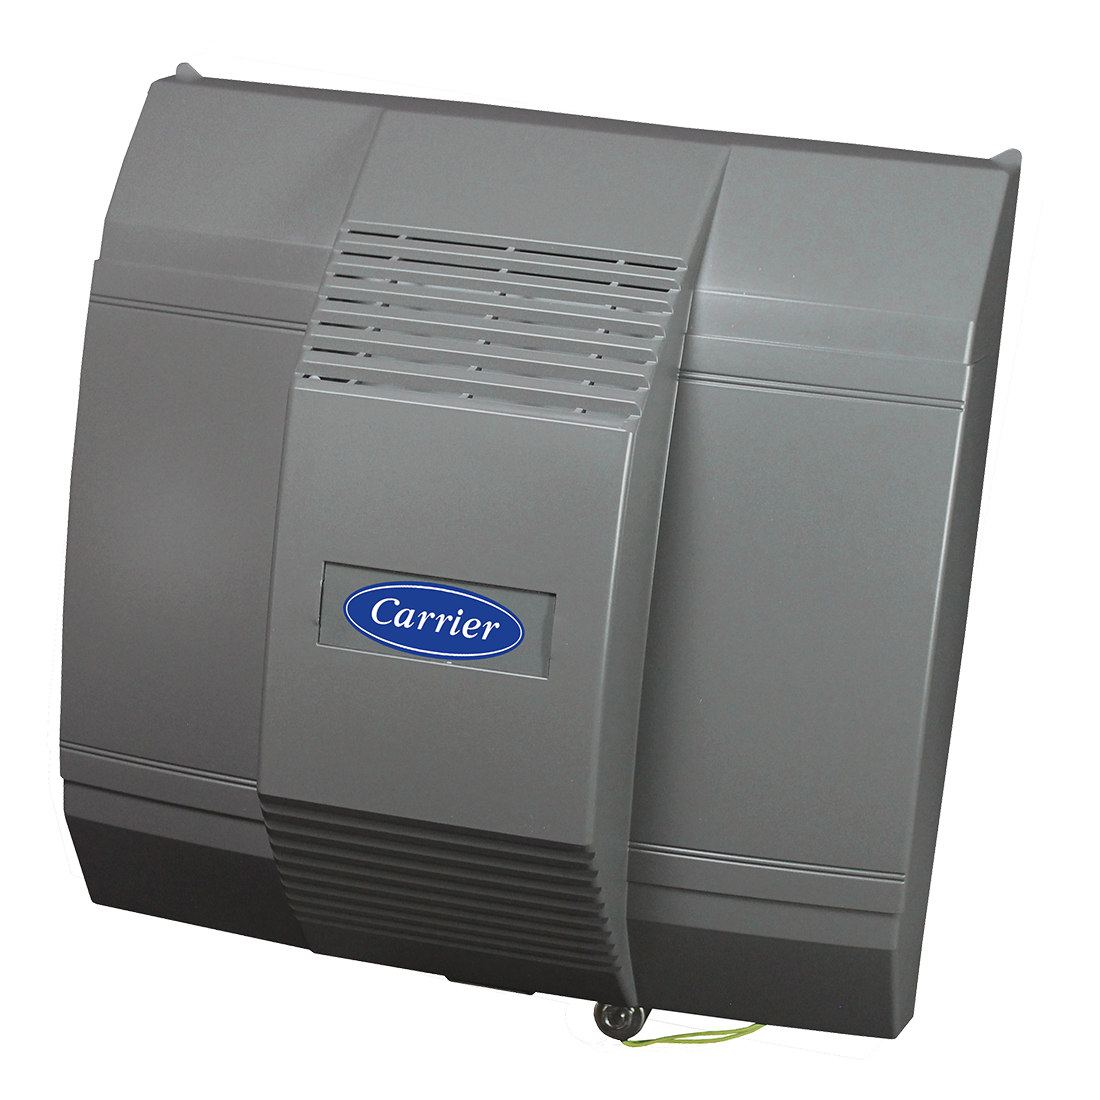 PERFORMANCE™ LARGE BYPASS HUMIDIFIER